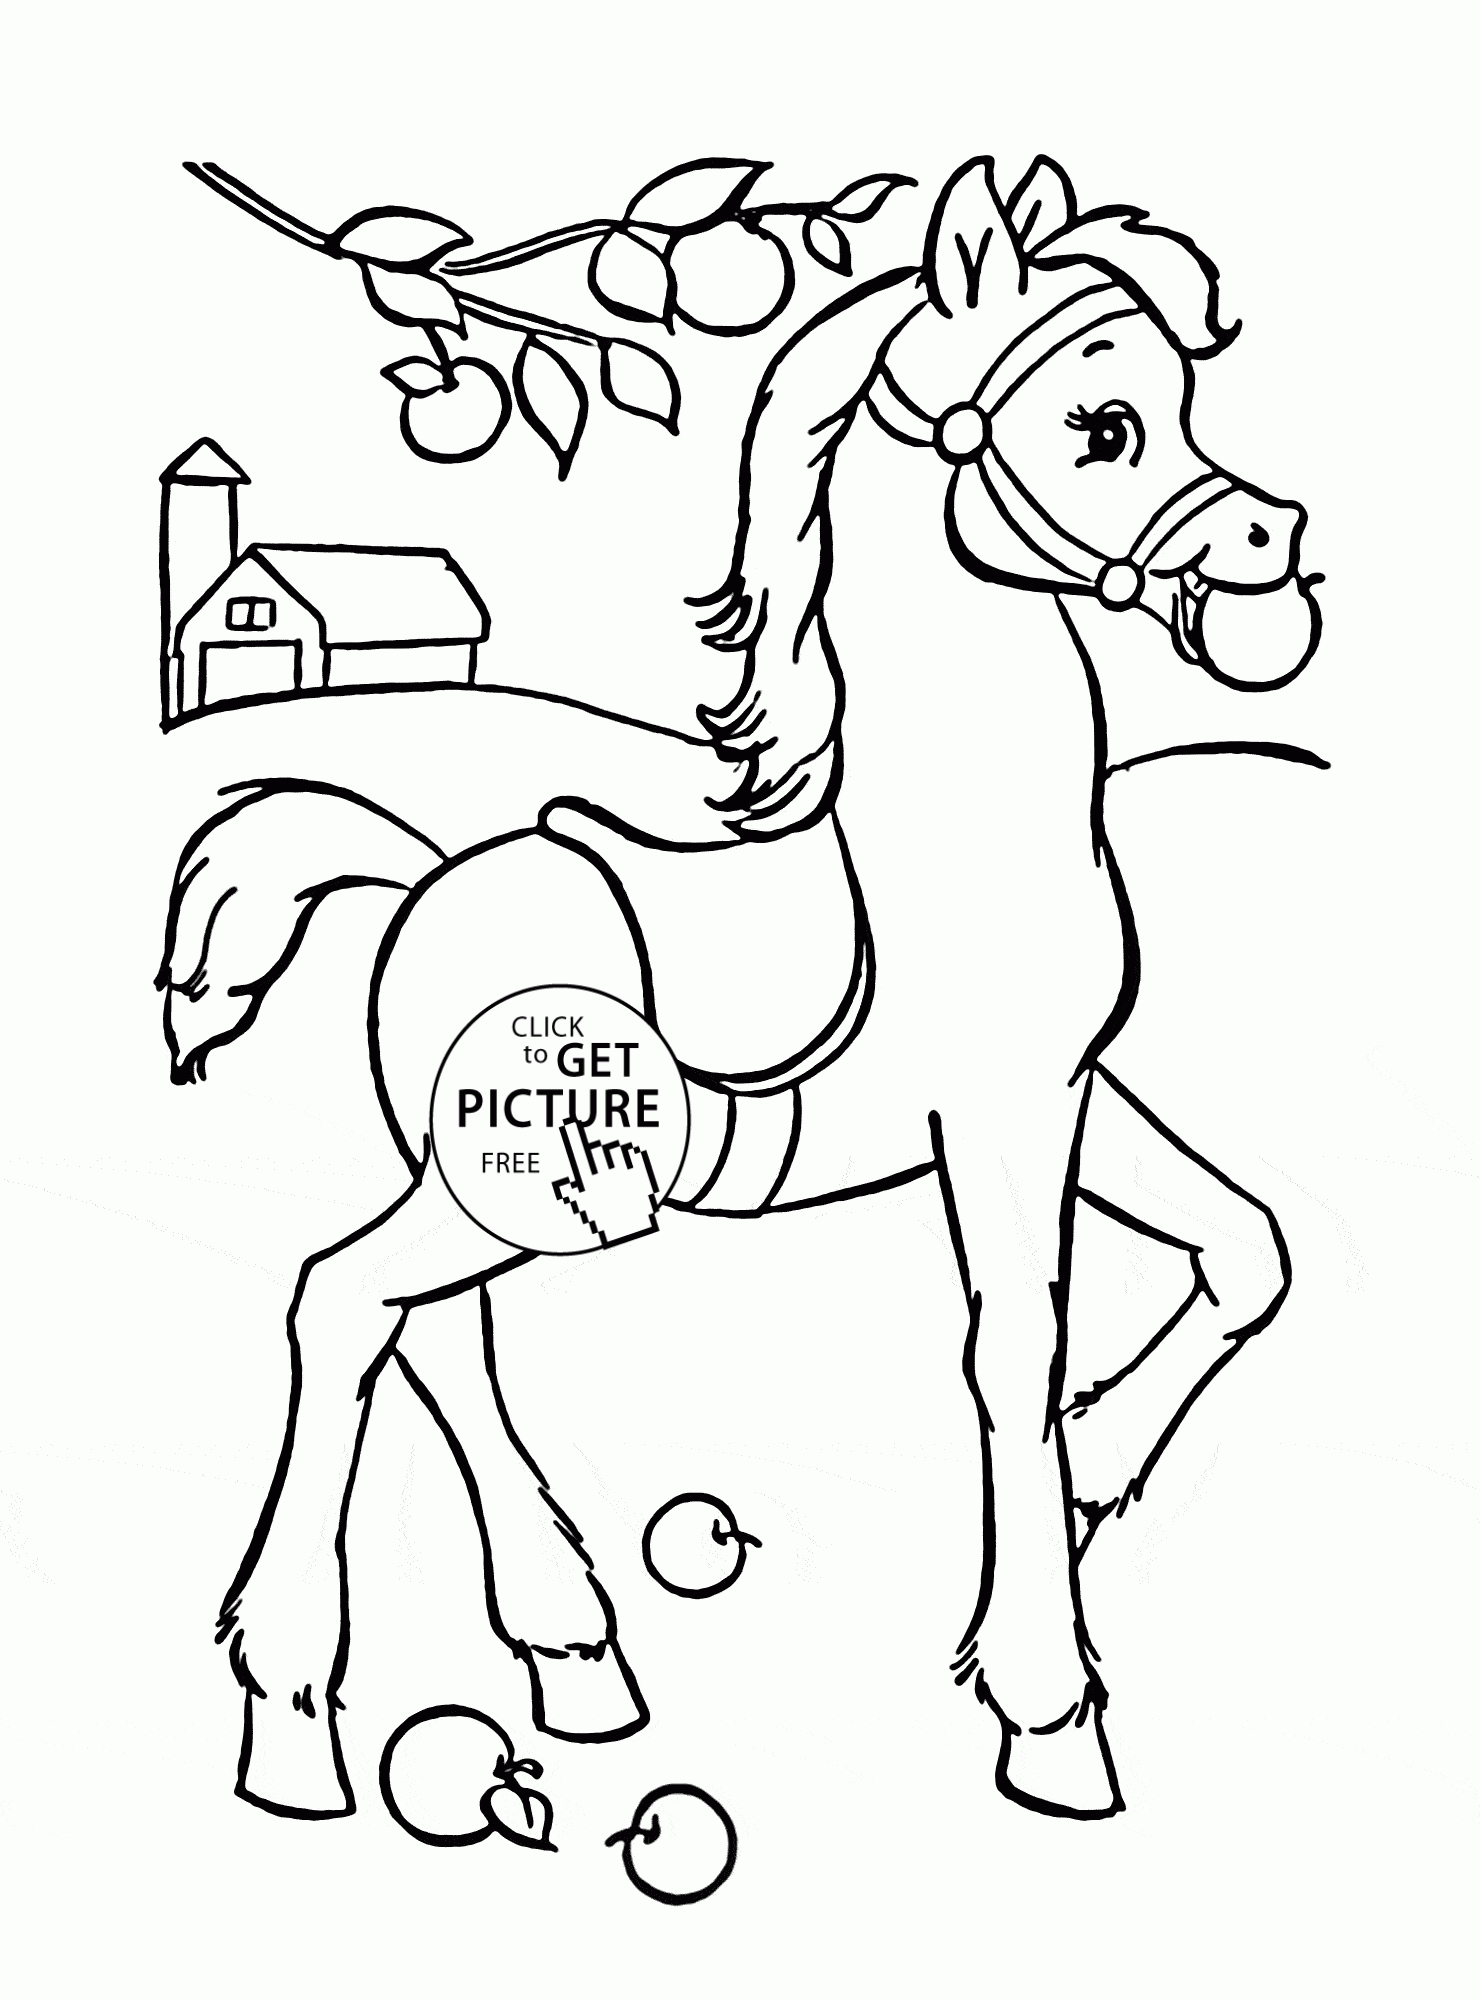 Funny Horse Coloring Page For Kids, Animal Coloring Pages Printables - Free Printable Horse Coloring Pages